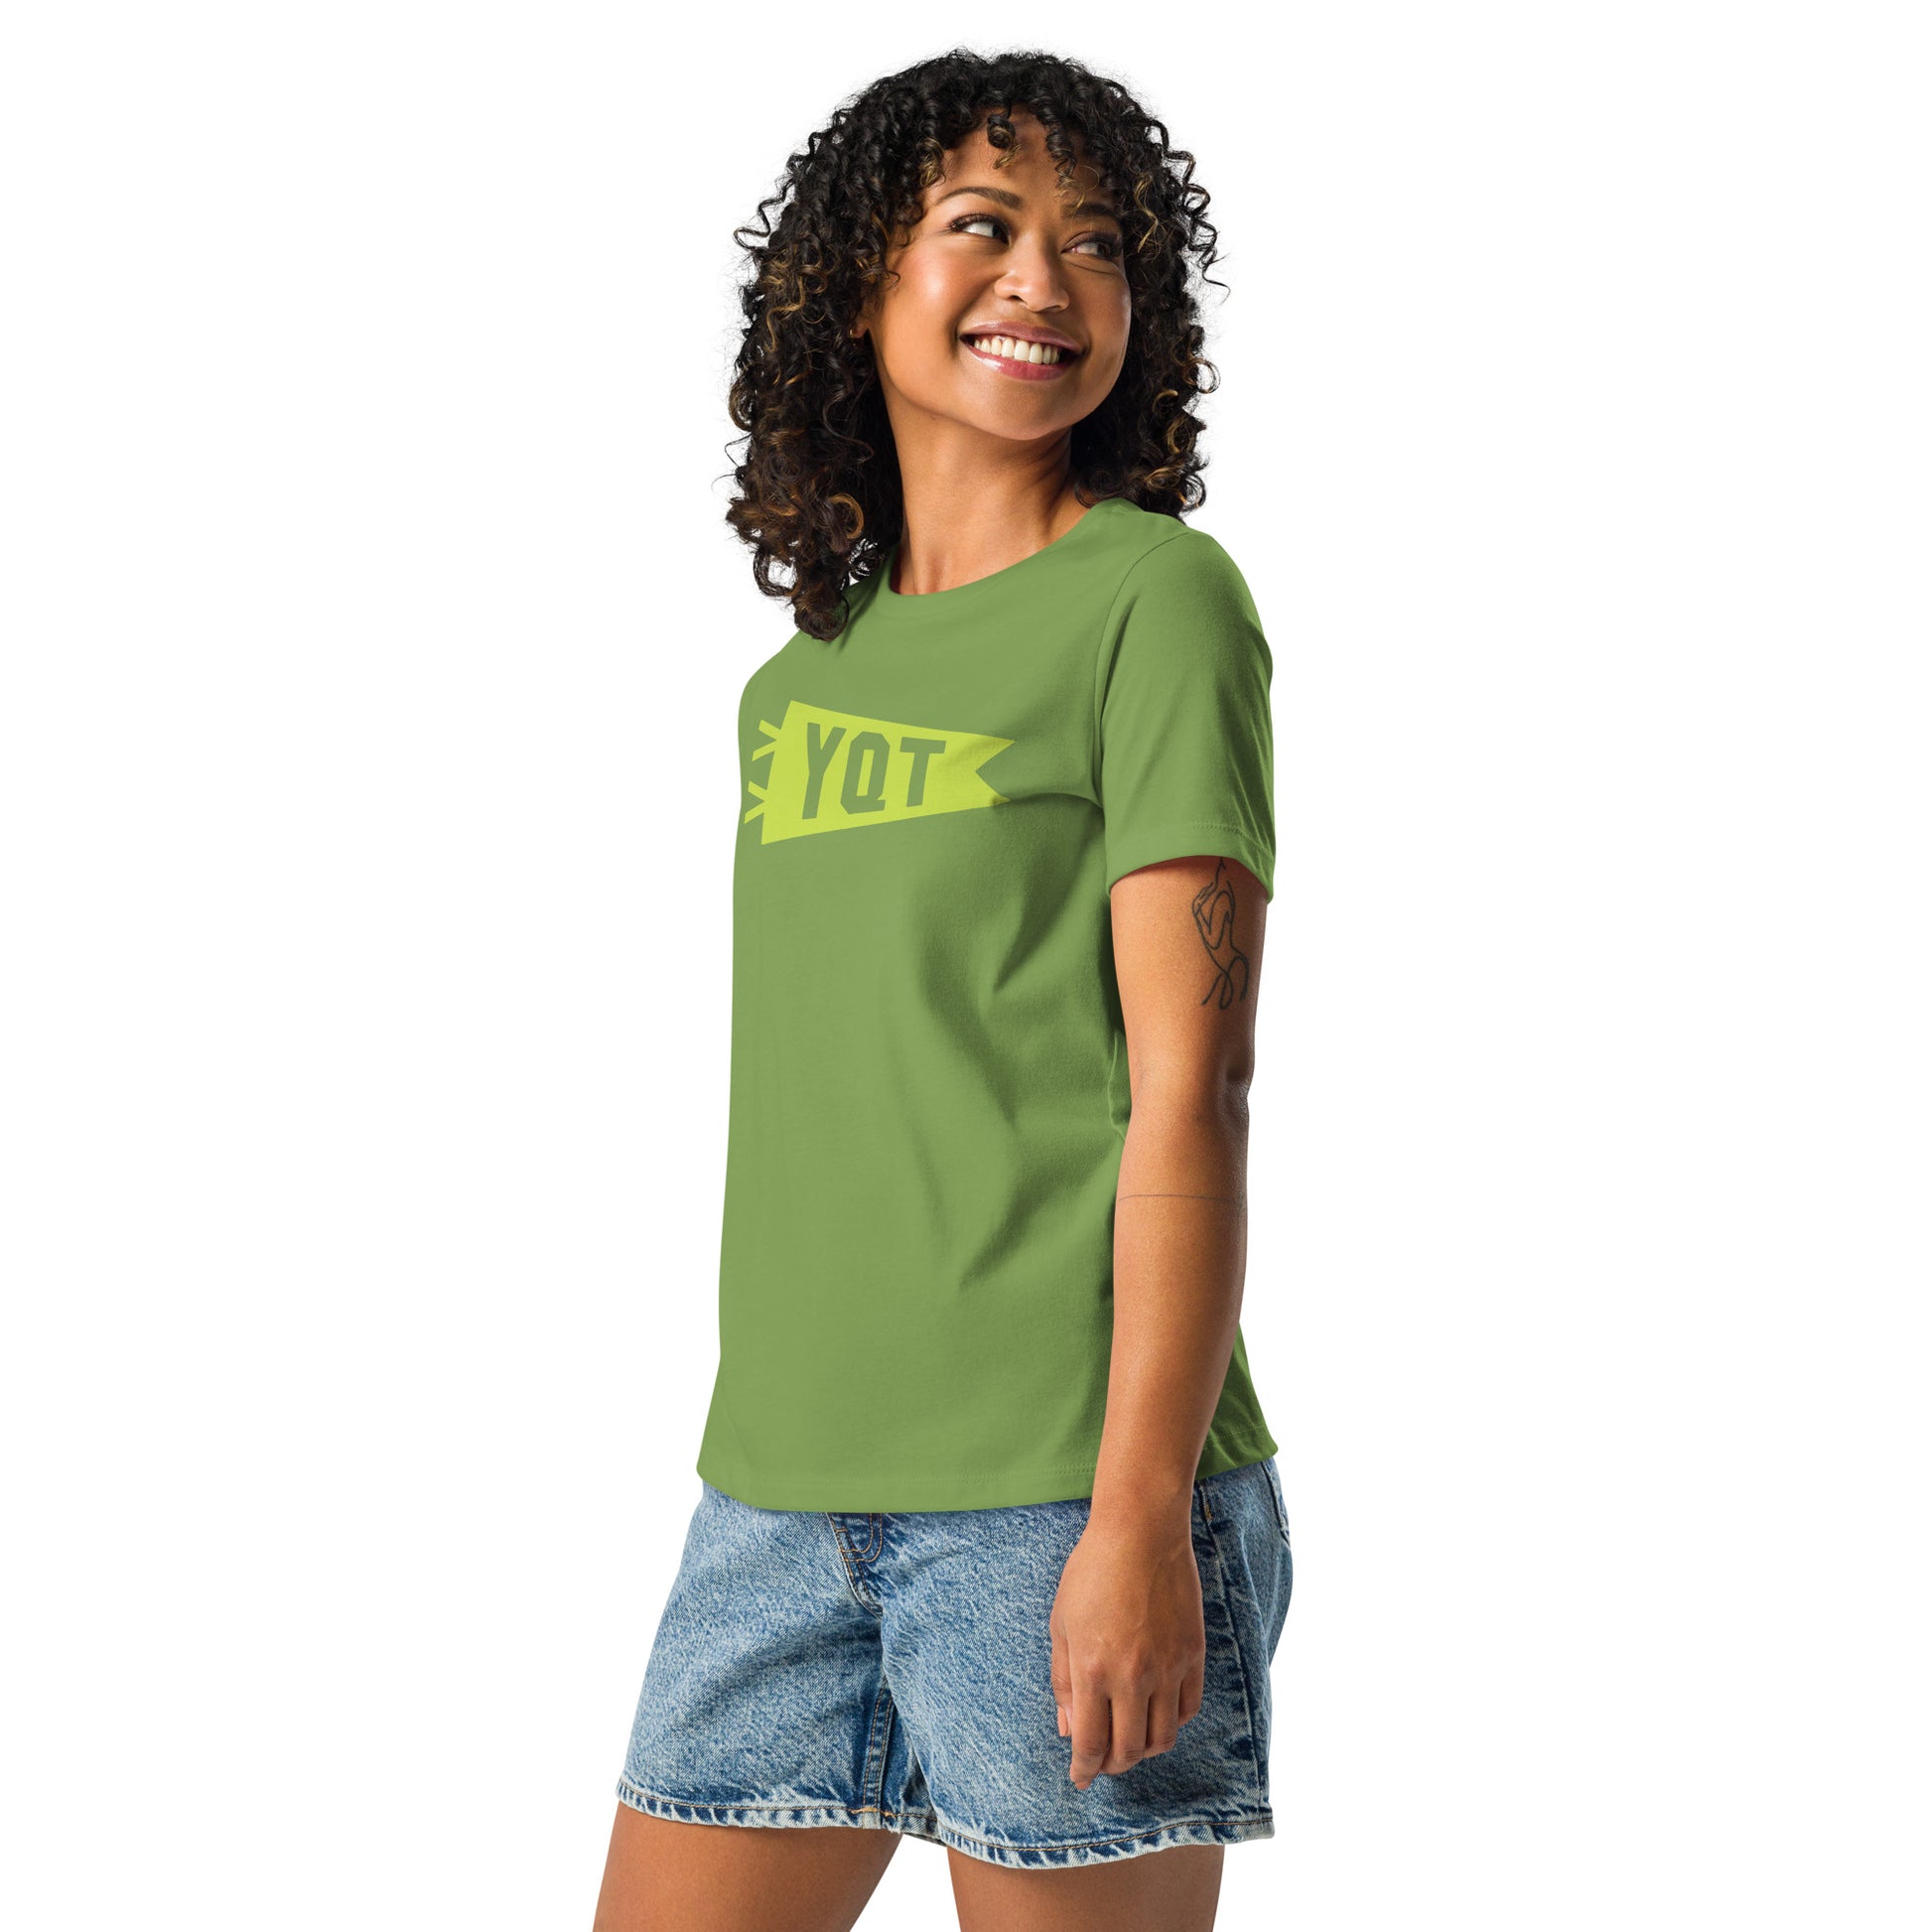 Airport Code Women's Tee - Green Graphic • YQT Thunder Bay • YHM Designs - Image 06